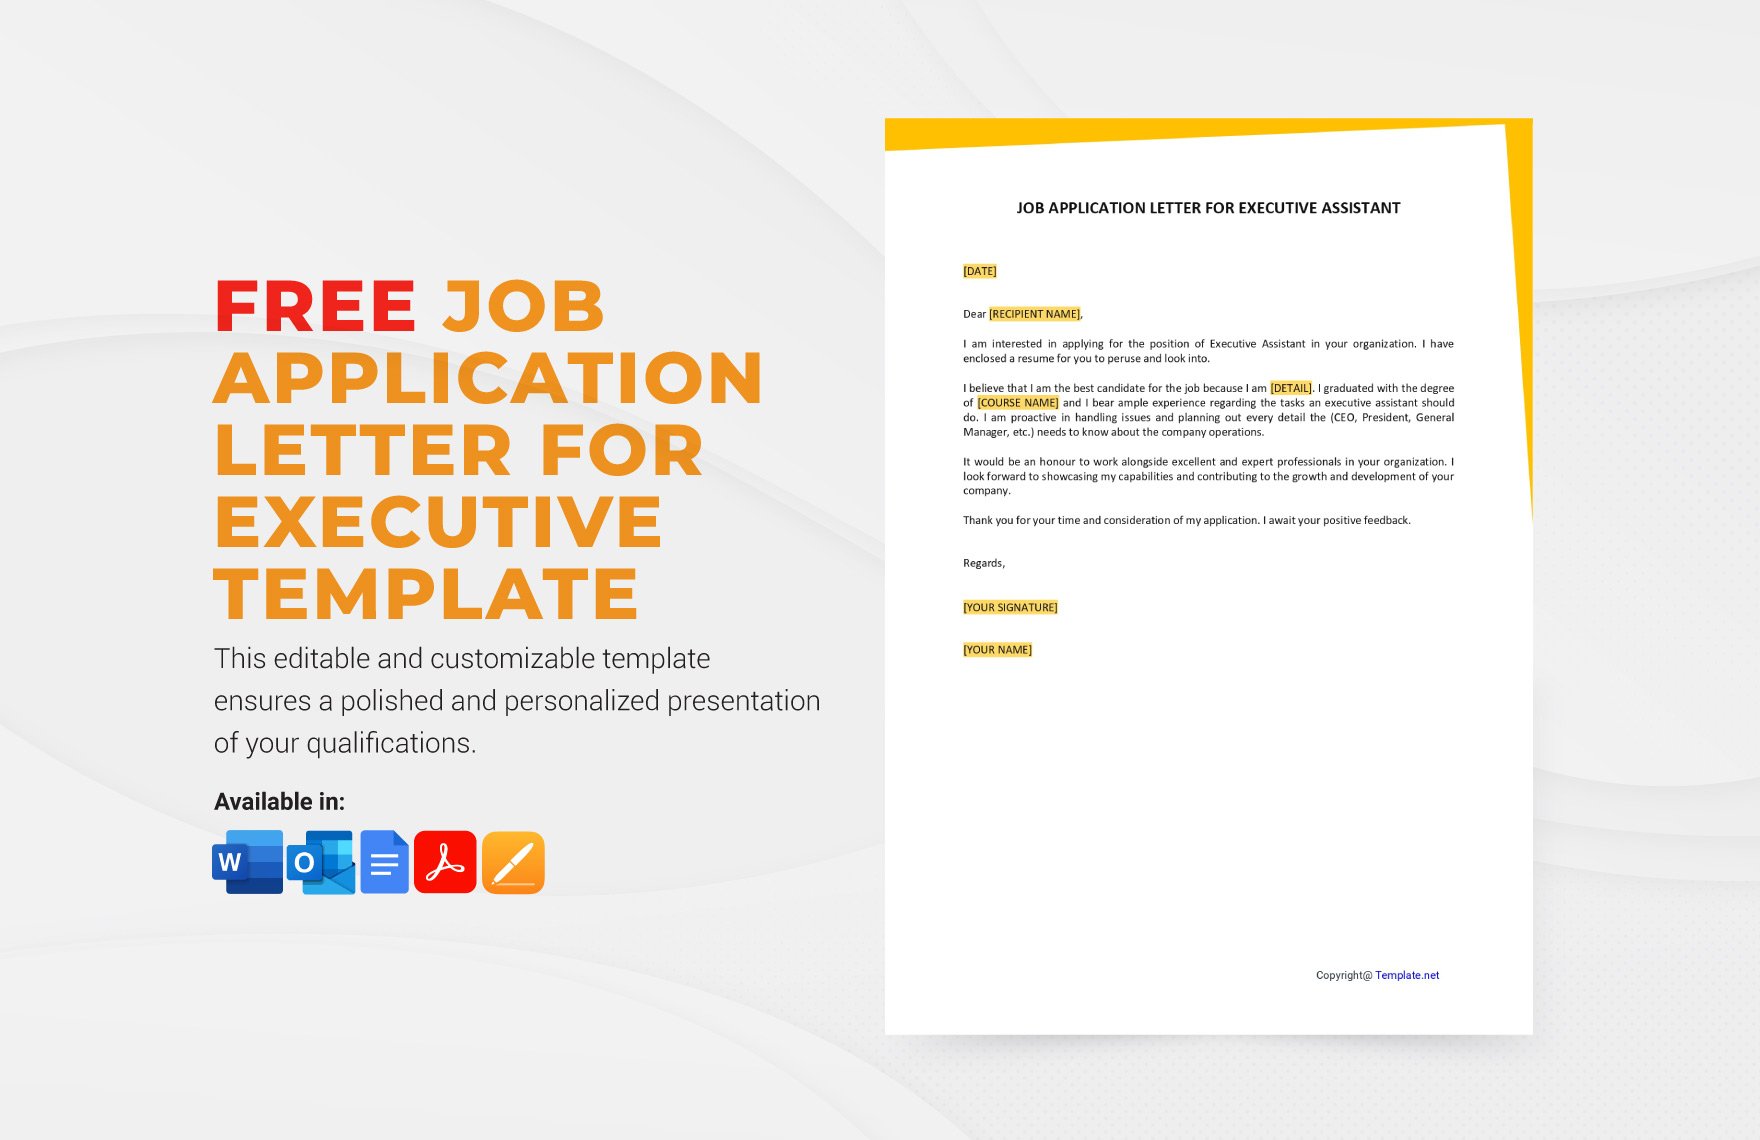 Job Application Letter for Executive Assistant